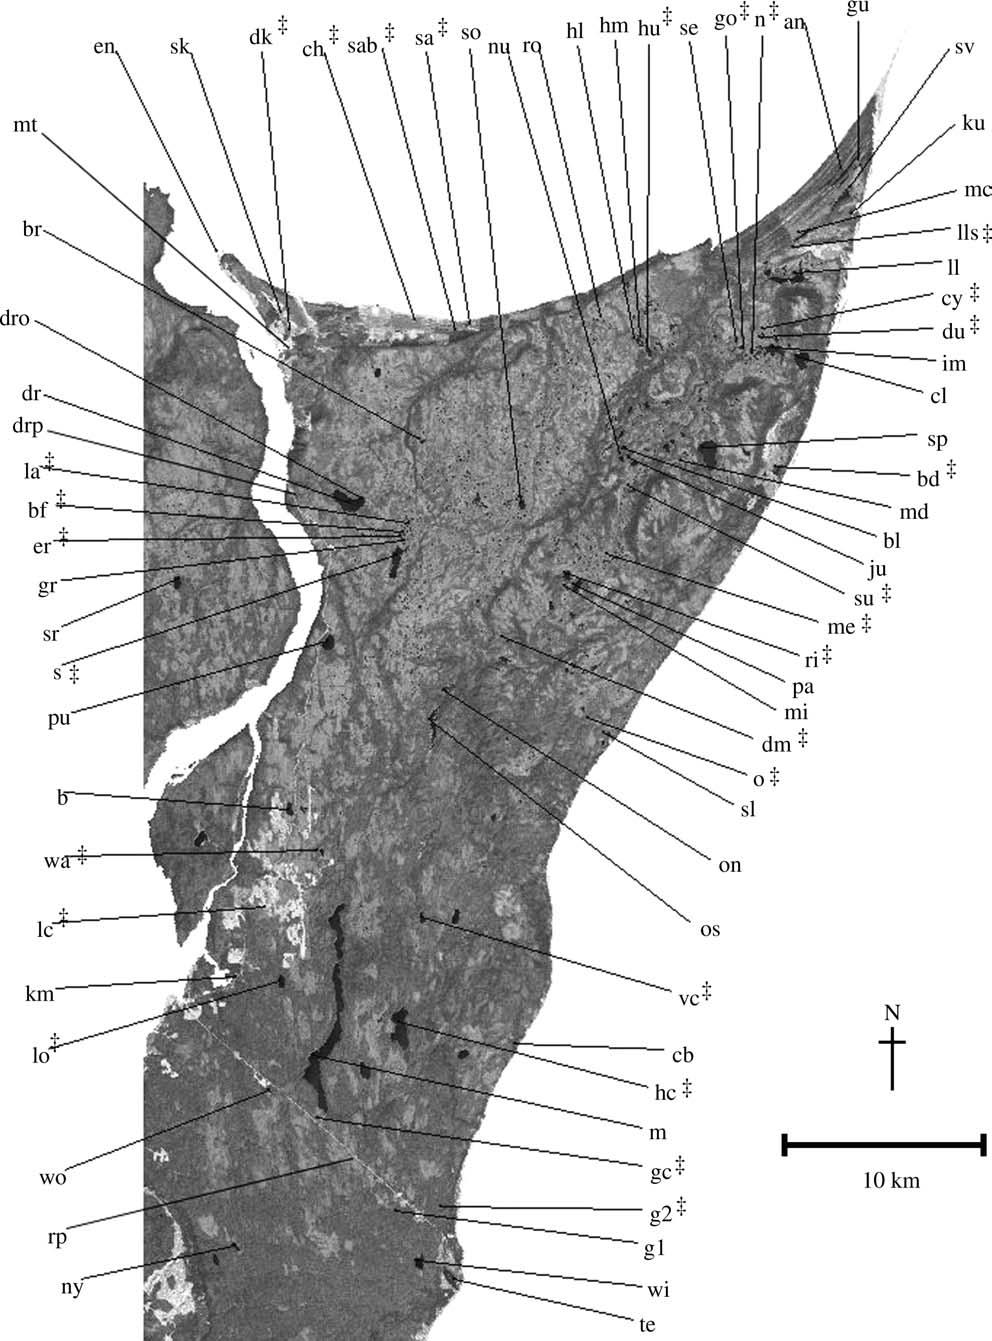 1488 M. A. SPOLJARIC AND T. E. REIMCHEN FIG. 2. Localities (see appendix) where three-spined stickleback were collected from the north-east corner of Haida Gwaii.